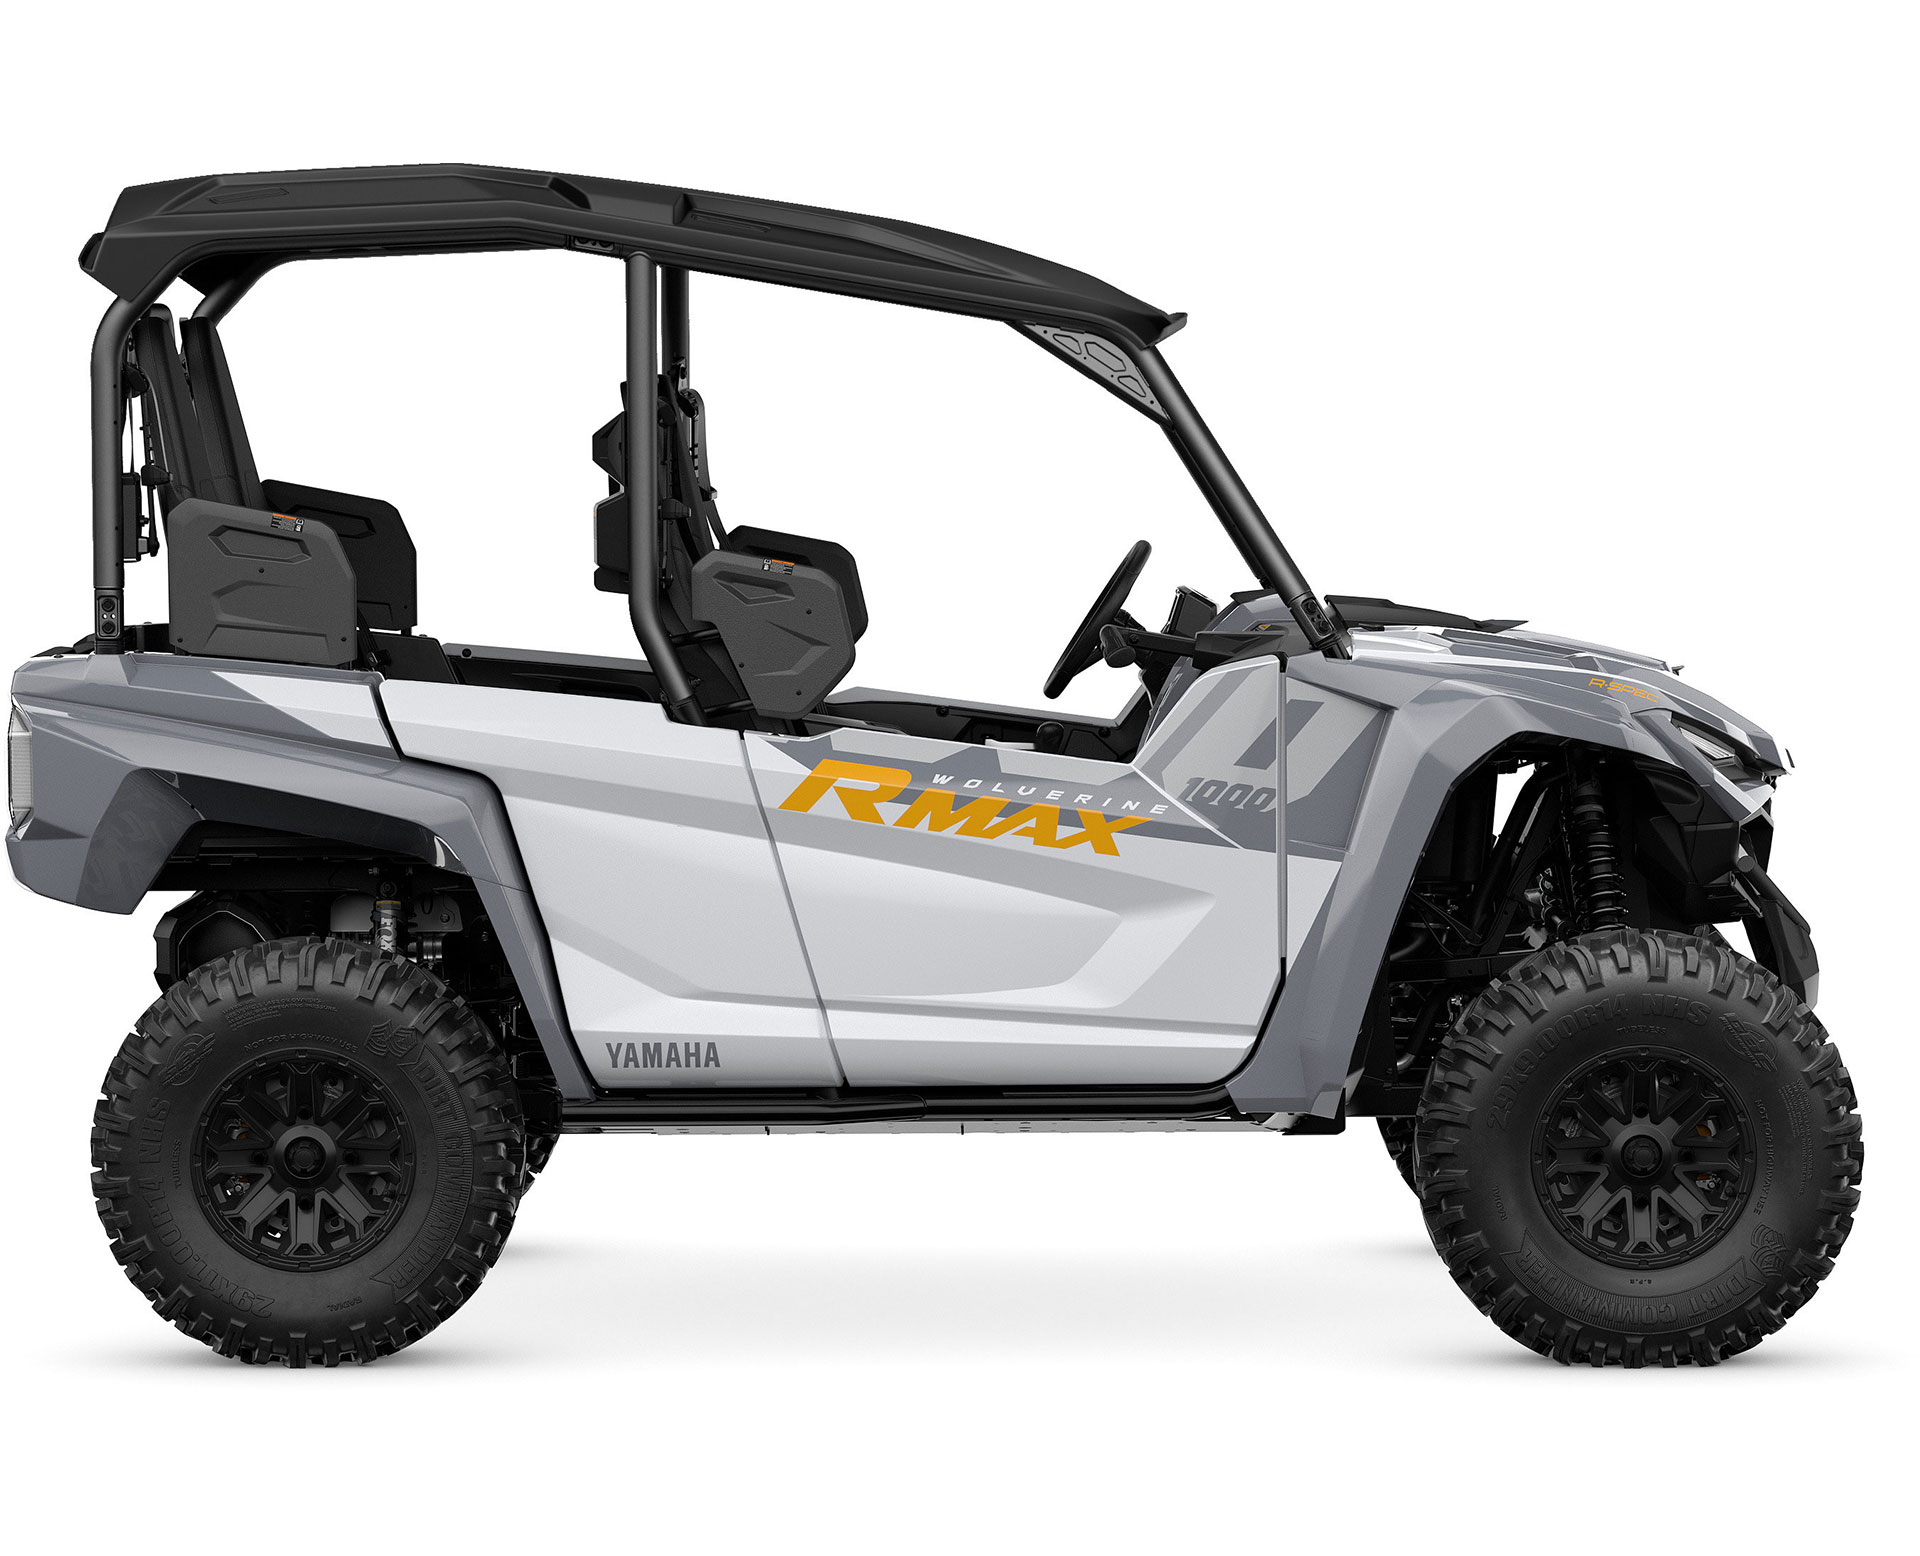 Thumbnail of your customized WOLVERINE(MD) RMAX(MC) 4 1000 R-SPEC 2024